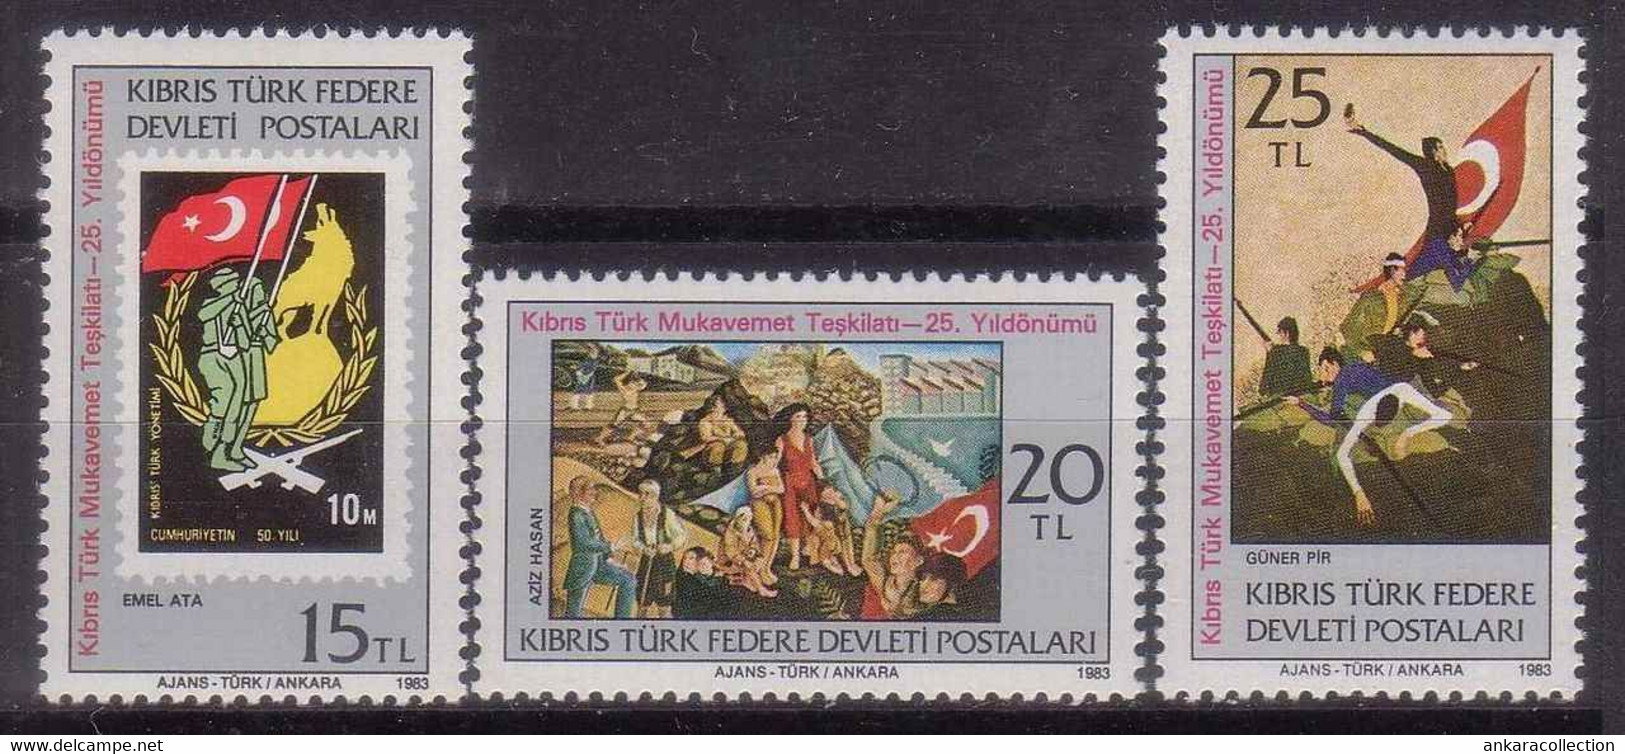 AC - NORTHERN CYPRUS STAMP -  ANNIVERSARIES AND EVENTS MNH 01 AUGUST 1983 - Nuevos